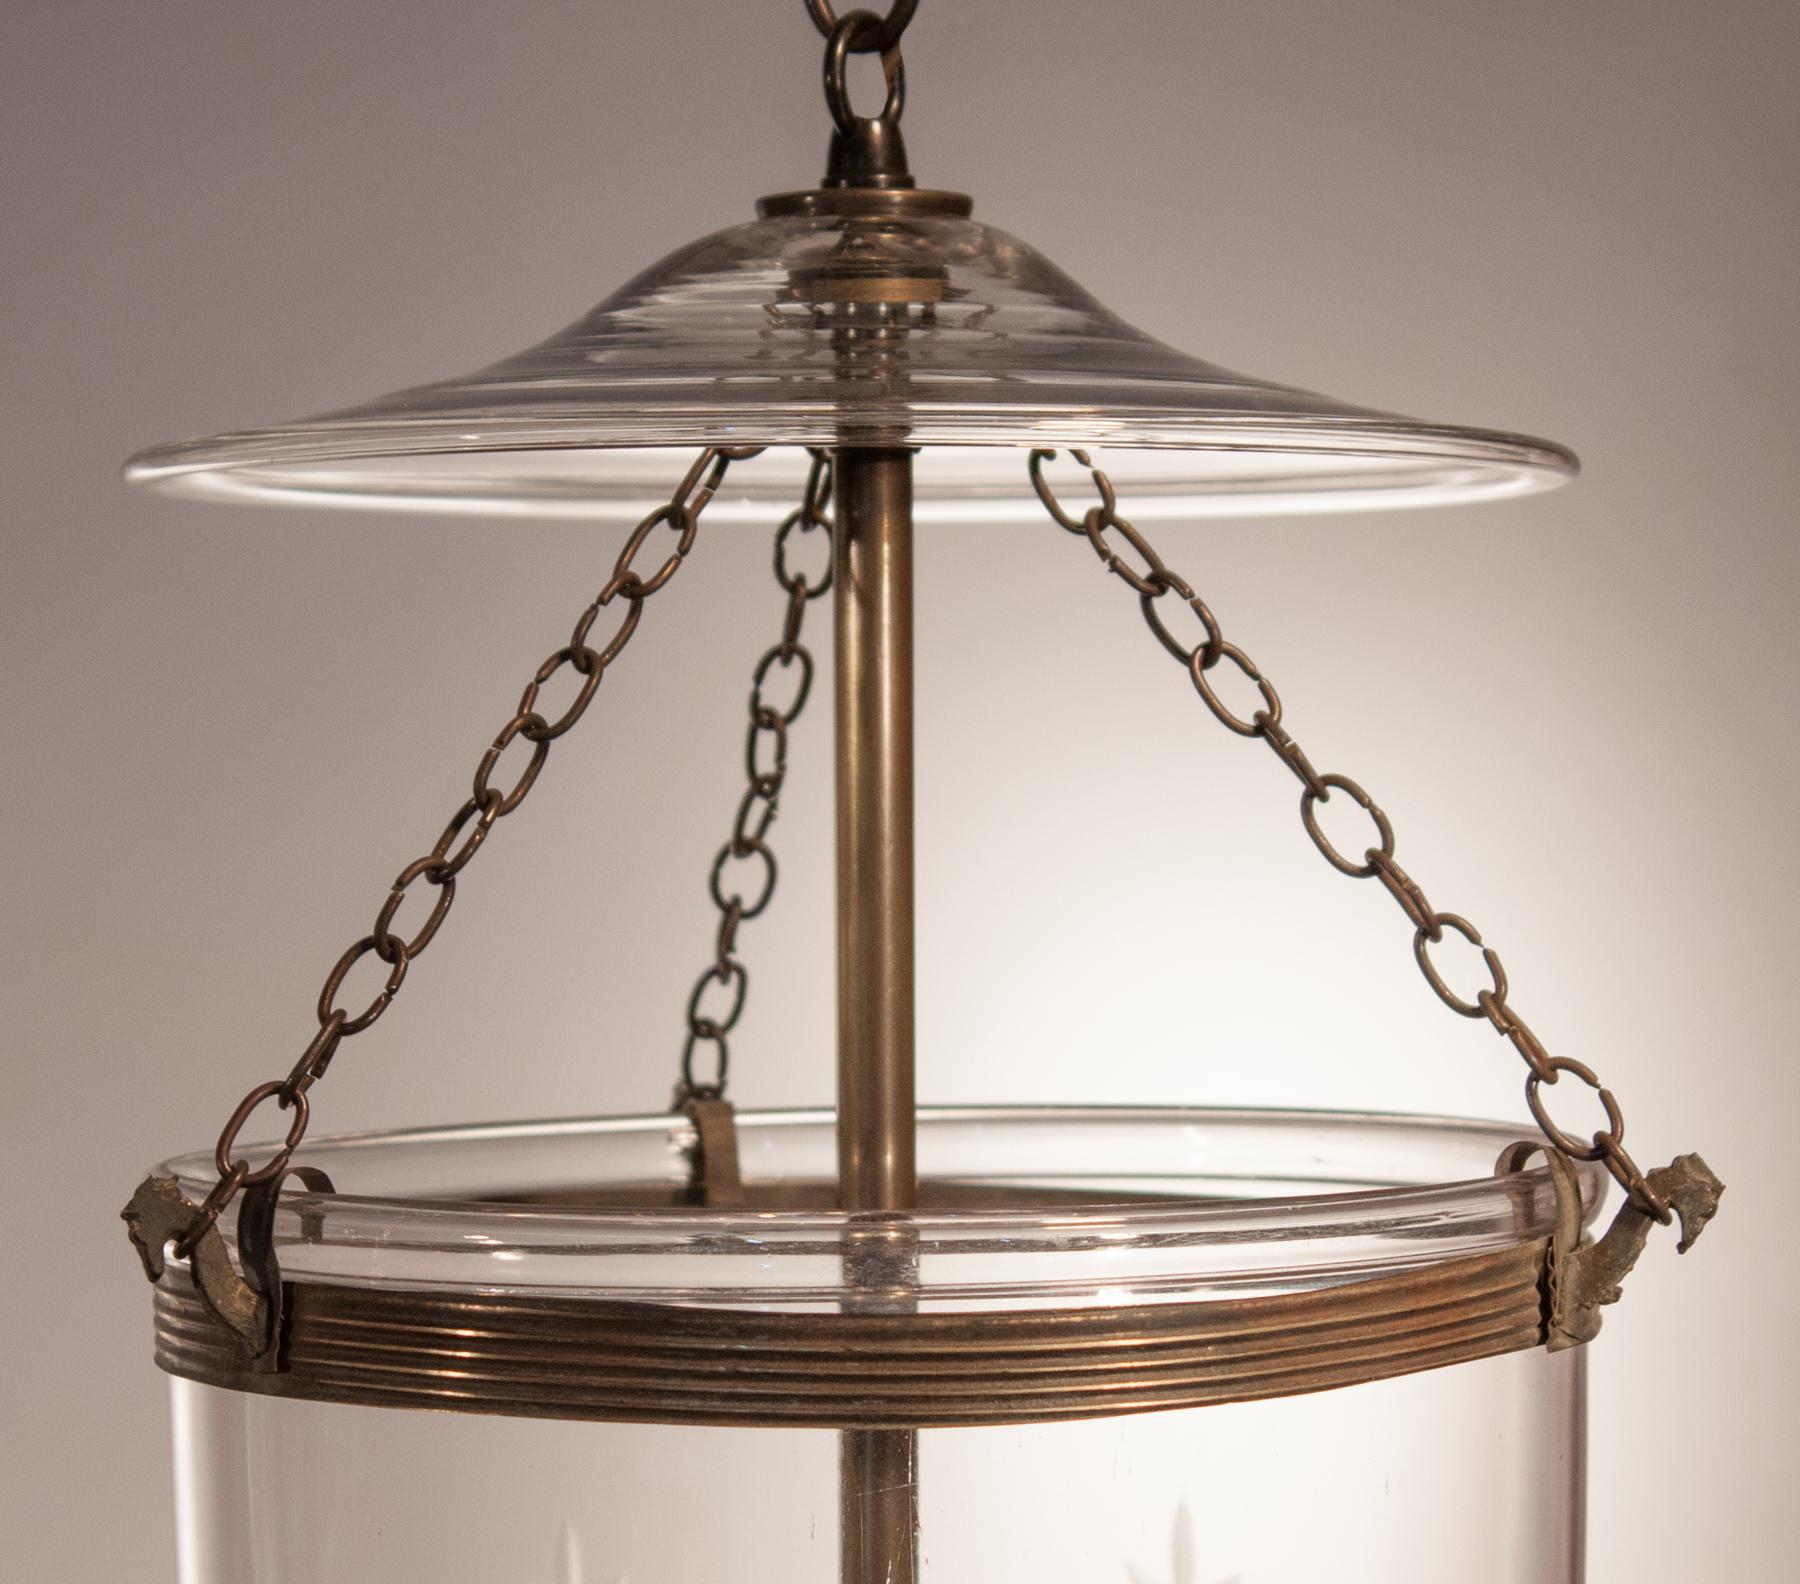  Pair of Bell Jar Lanterns with Etched Stars 1